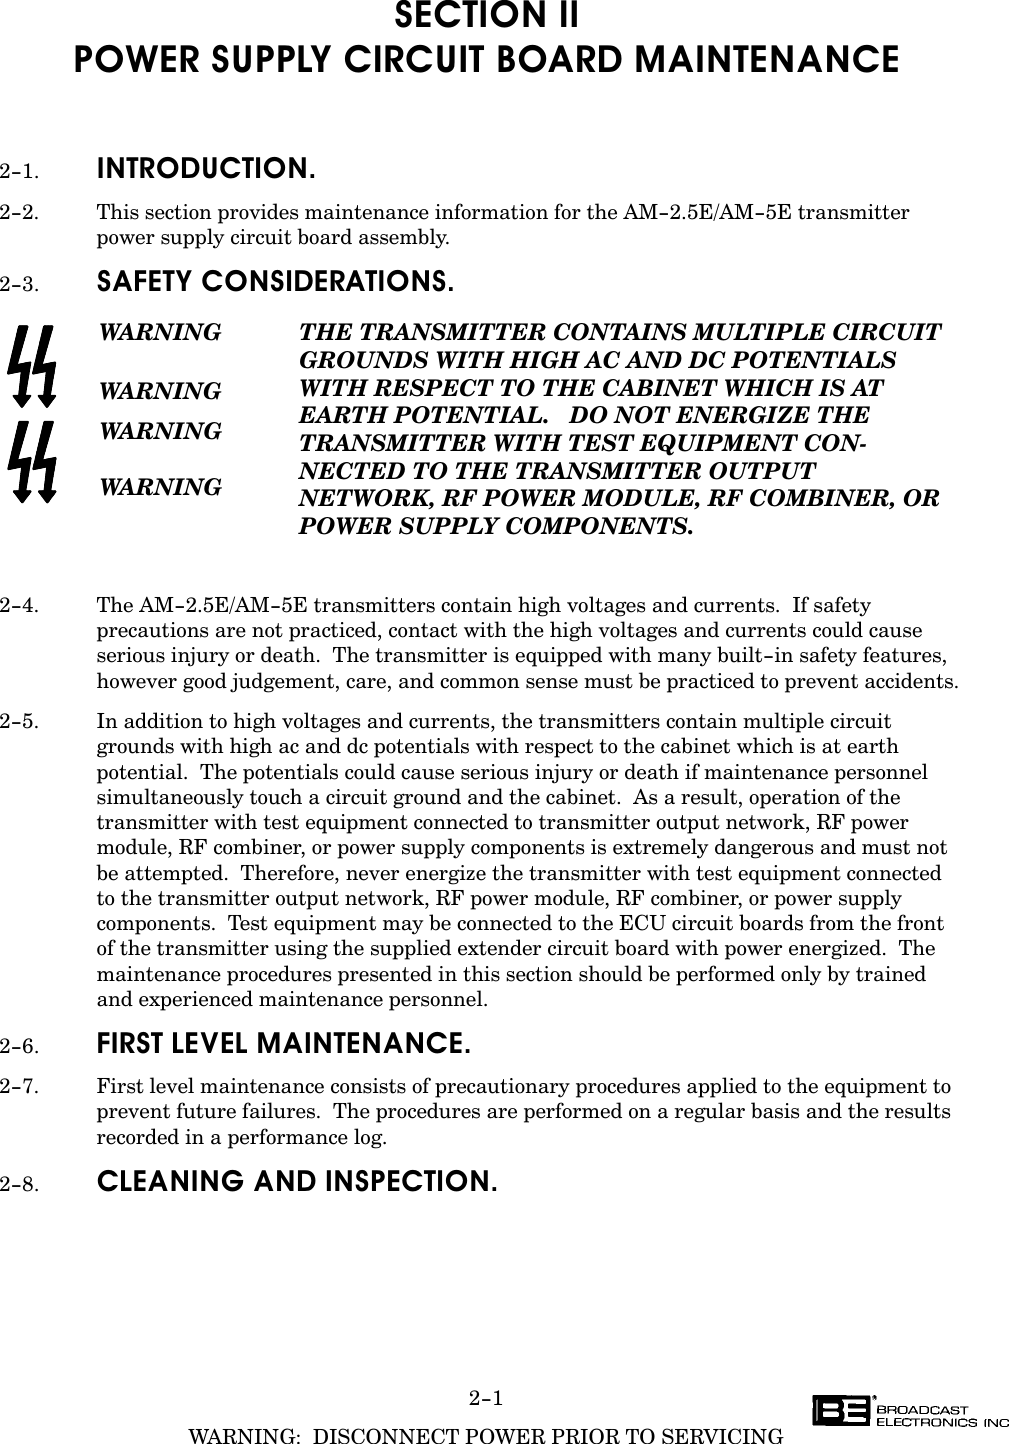 2-1WARNING:  DISCONNECT POWER PRIOR TO SERVICINGSECTION IIPOWER SUPPLY CIRCUIT BOARD MAINTENANCE2-1. INTRODUCTION.2-2. This section provides maintenance information for the AM-2.5E/AM-5E transmitterpower supply circuit board assembly.2-3. SAFETY CONSIDERATIONS.WARNINGWARNINGWARNINGWARNINGTHE TRANSMITTER CONTAINS MULTIPLE CIRCUITGROUNDS WITH HIGH AC AND DC POTENTIALSWITH RESPECT TO THE CABINET WHICH IS AT EARTH POTENTIAL.   DO NOT ENERGIZE THETRANSMITTER WITH TEST EQUIPMENT CONĆNECTED TO THE TRANSMITTER OUTPUT NETWORK, RF POWER MODULE, RF COMBINER, ORPOWER SUPPLY COMPONENTS.2-4. The AM-2.5E/AM-5E transmitters contain high voltages and currents.  If safetyprecautions are not practiced, contact with the high voltages and currents could causeserious injury or death.  The transmitter is equipped with many built-in safety features,however good judgement, care, and common sense must be practiced to prevent accidents.2-5. In addition to high voltages and currents, the transmitters contain multiple circuitgrounds with high ac and dc potentials with respect to the cabinet which is at earthpotential.  The potentials could cause serious injury or death if maintenance personnelsimultaneously touch a circuit ground and the cabinet.  As a result, operation of thetransmitter with test equipment connected to transmitter output network, RF powermodule, RF combiner, or power supply components is extremely dangerous and must notbe attempted.  Therefore, never energize the transmitter with test equipment connectedto the transmitter output network, RF power module, RF combiner, or power supplycomponents.  Test equipment may be connected to the ECU circuit boards from the front of the transmitter using the supplied extender circuit board with power energized.  Themaintenance procedures presented in this section should be performed only by trained and experienced maintenance personnel.2-6. FIRST LEVEL MAINTENANCE.2-7. First level maintenance consists of precautionary procedures applied to the equipment toprevent future failures.  The procedures are performed on a regular basis and the resultsrecorded in a performance log.2-8. CLEANING AND INSPECTION.